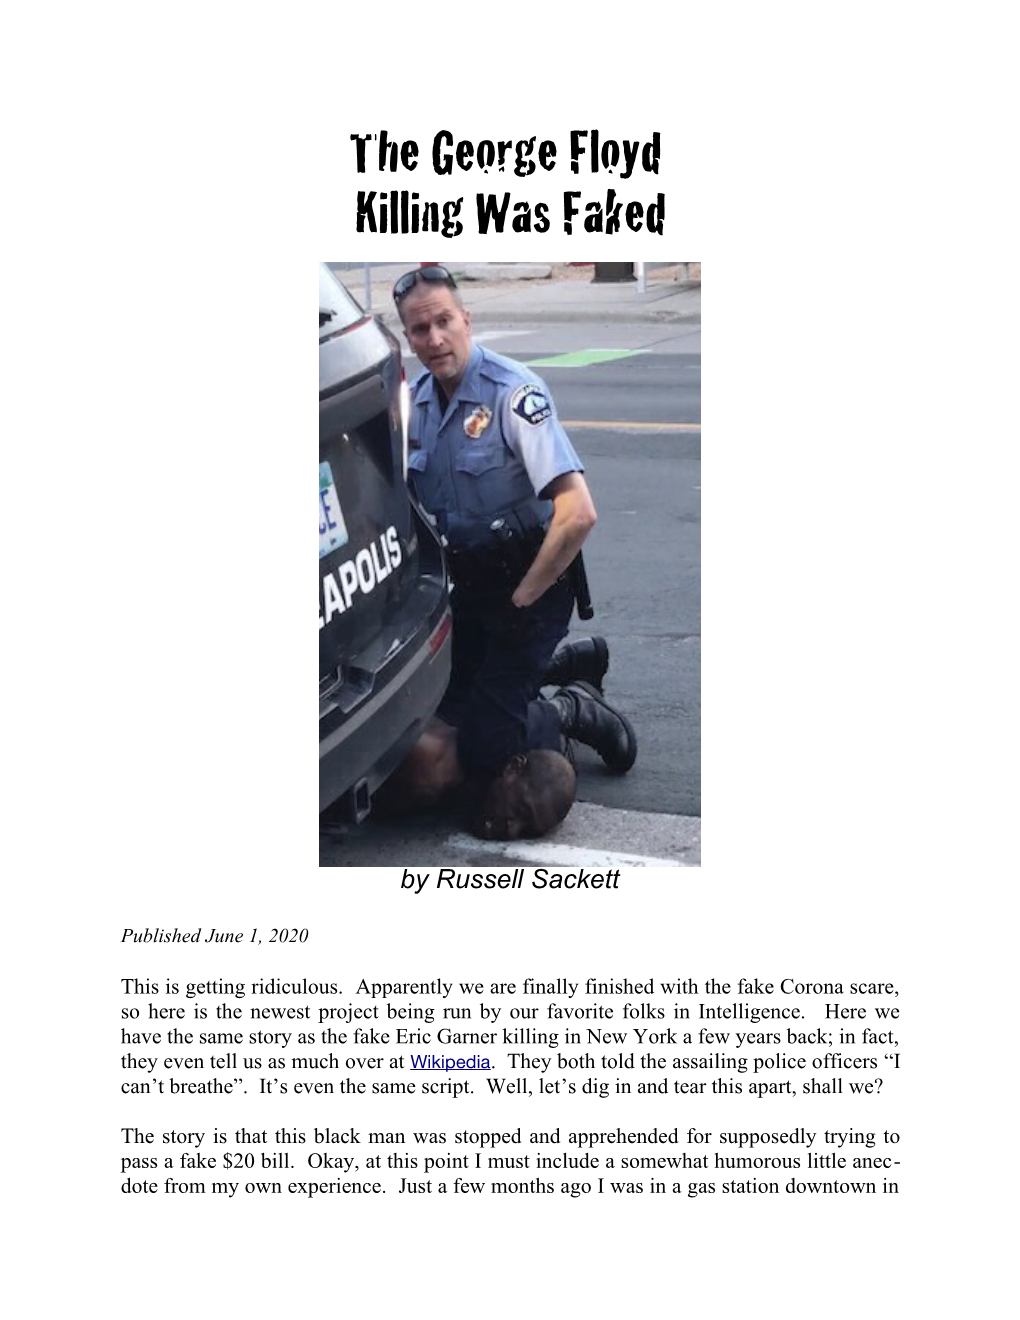 The George Floyd Killing Was Faked